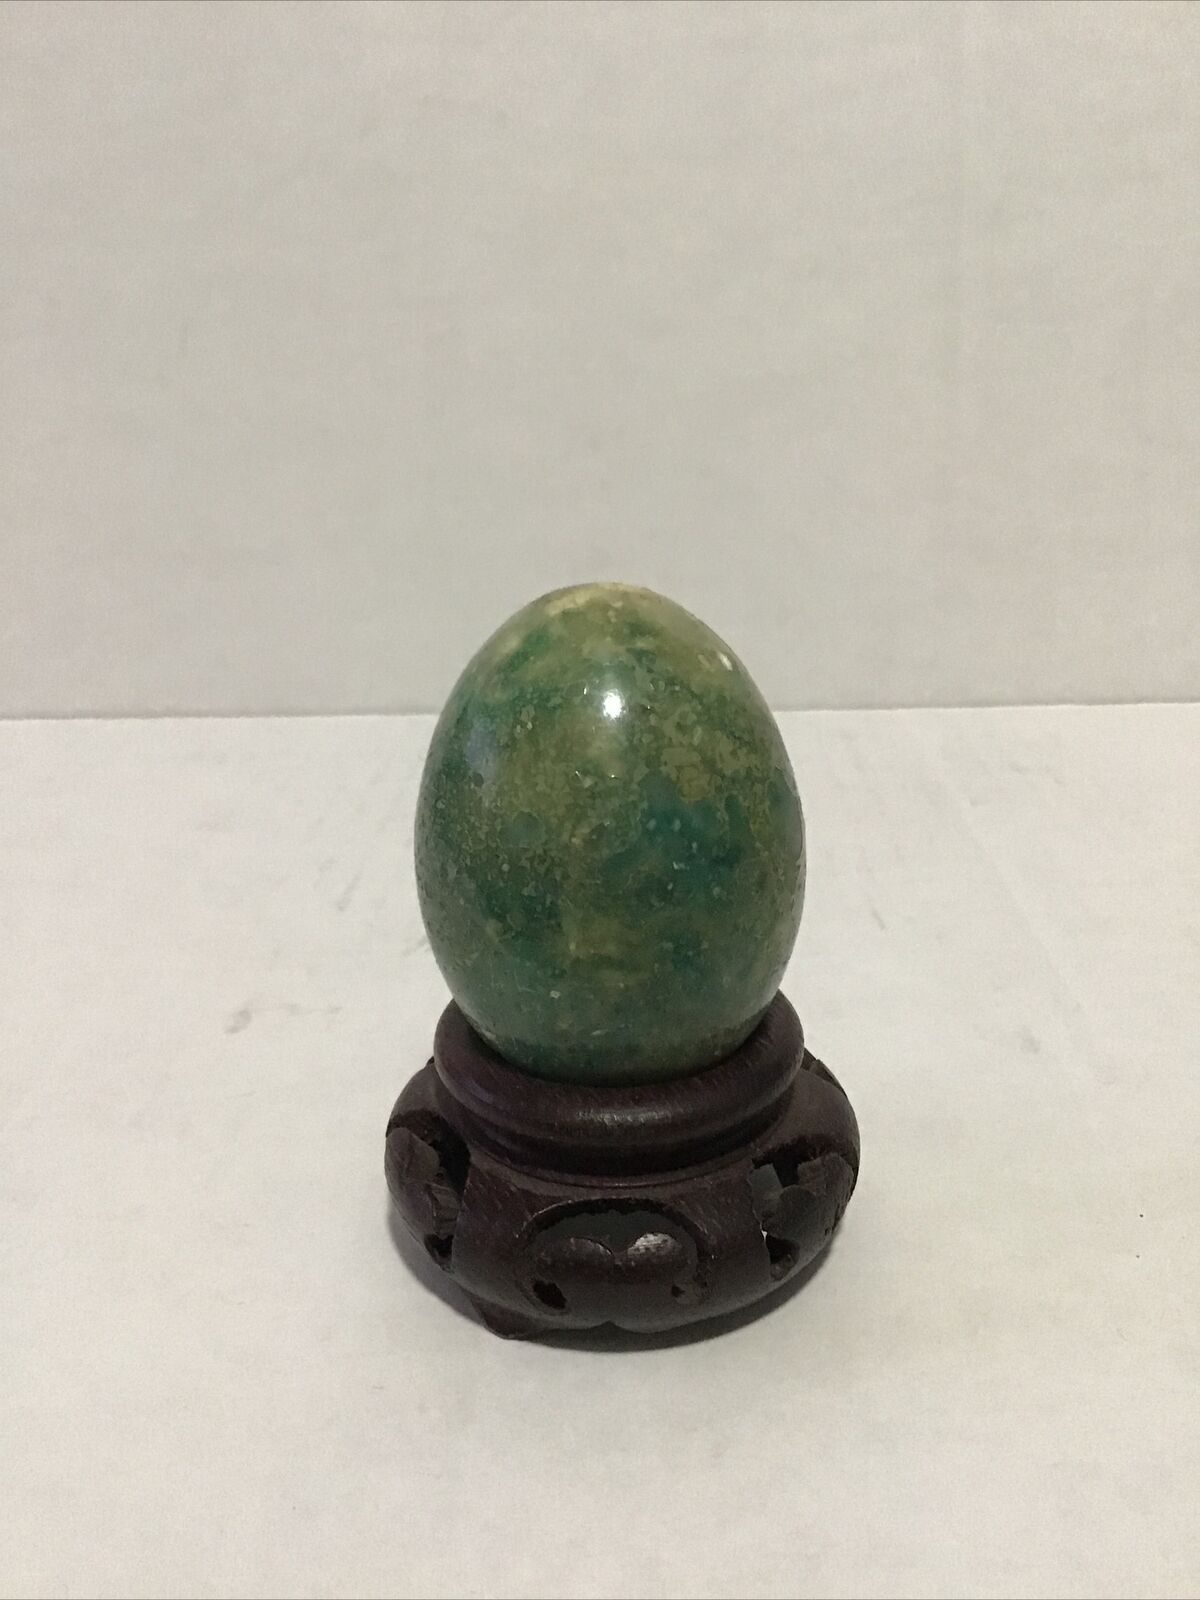 Vintage Alabaster Hand Carved Stone Egg Green Earth Tones Marble With Stand